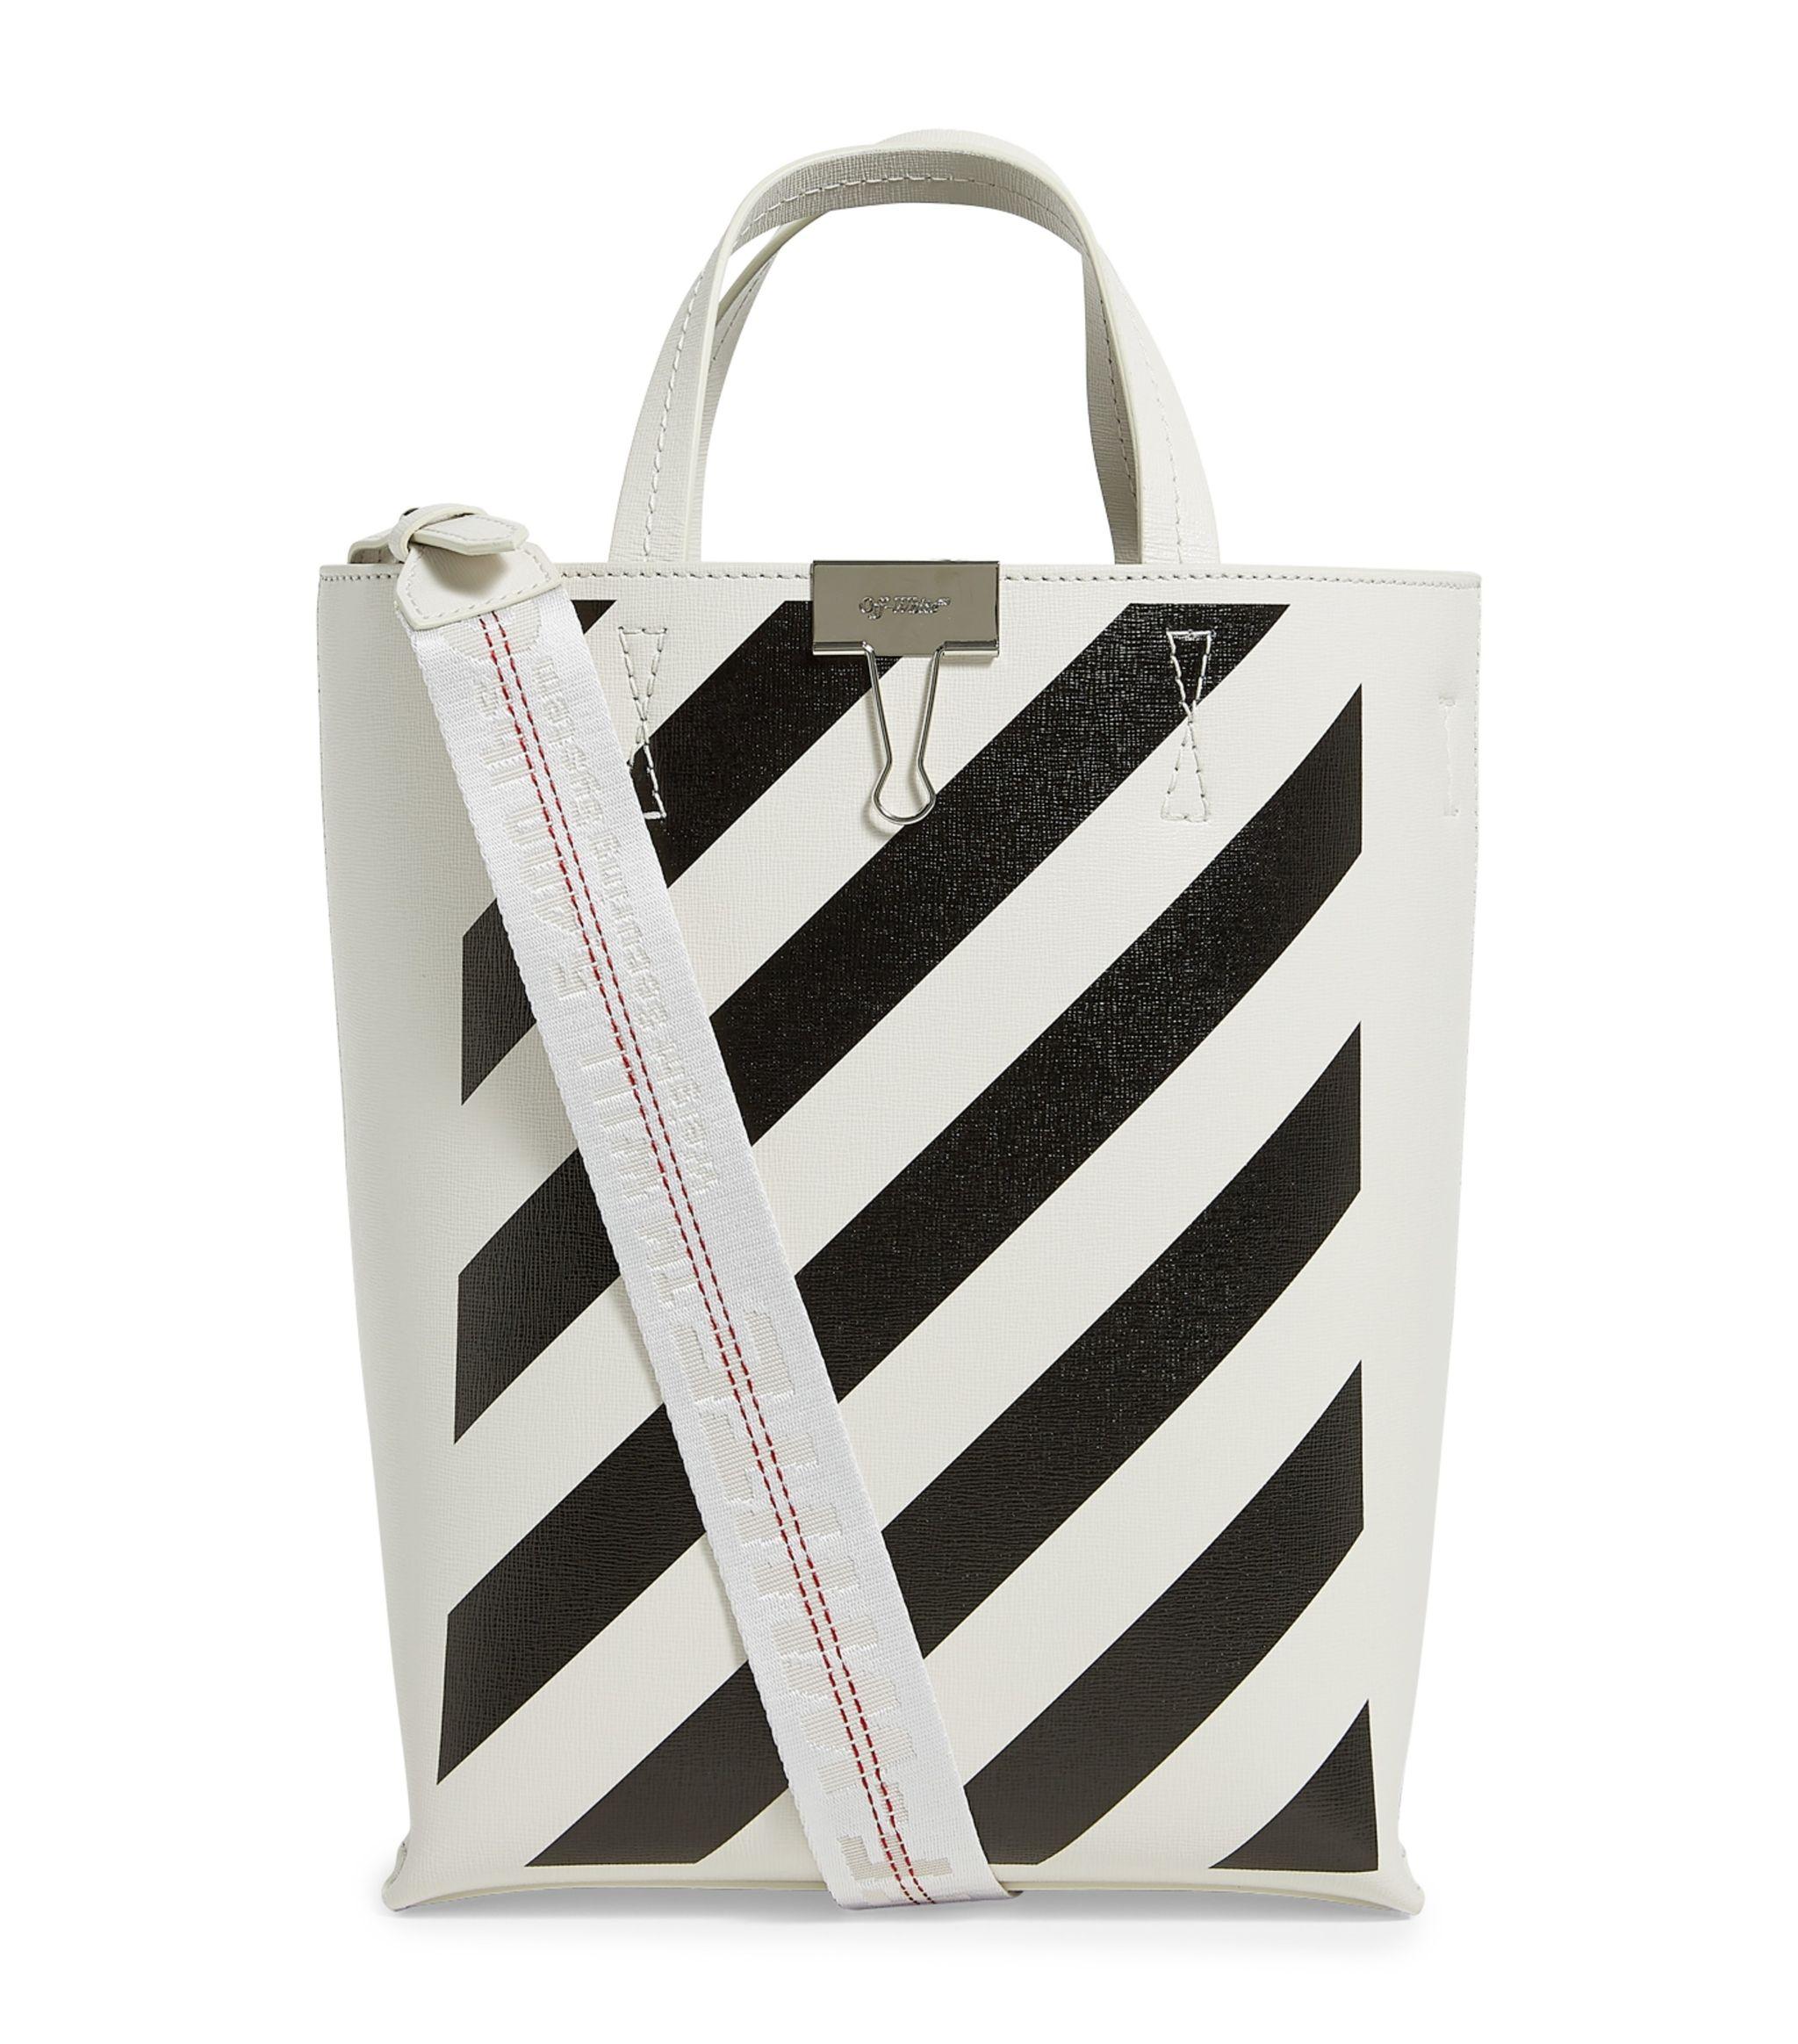 Off-White c/o Virgil Abloh Leather Diagonals Tote Bag - Lyst